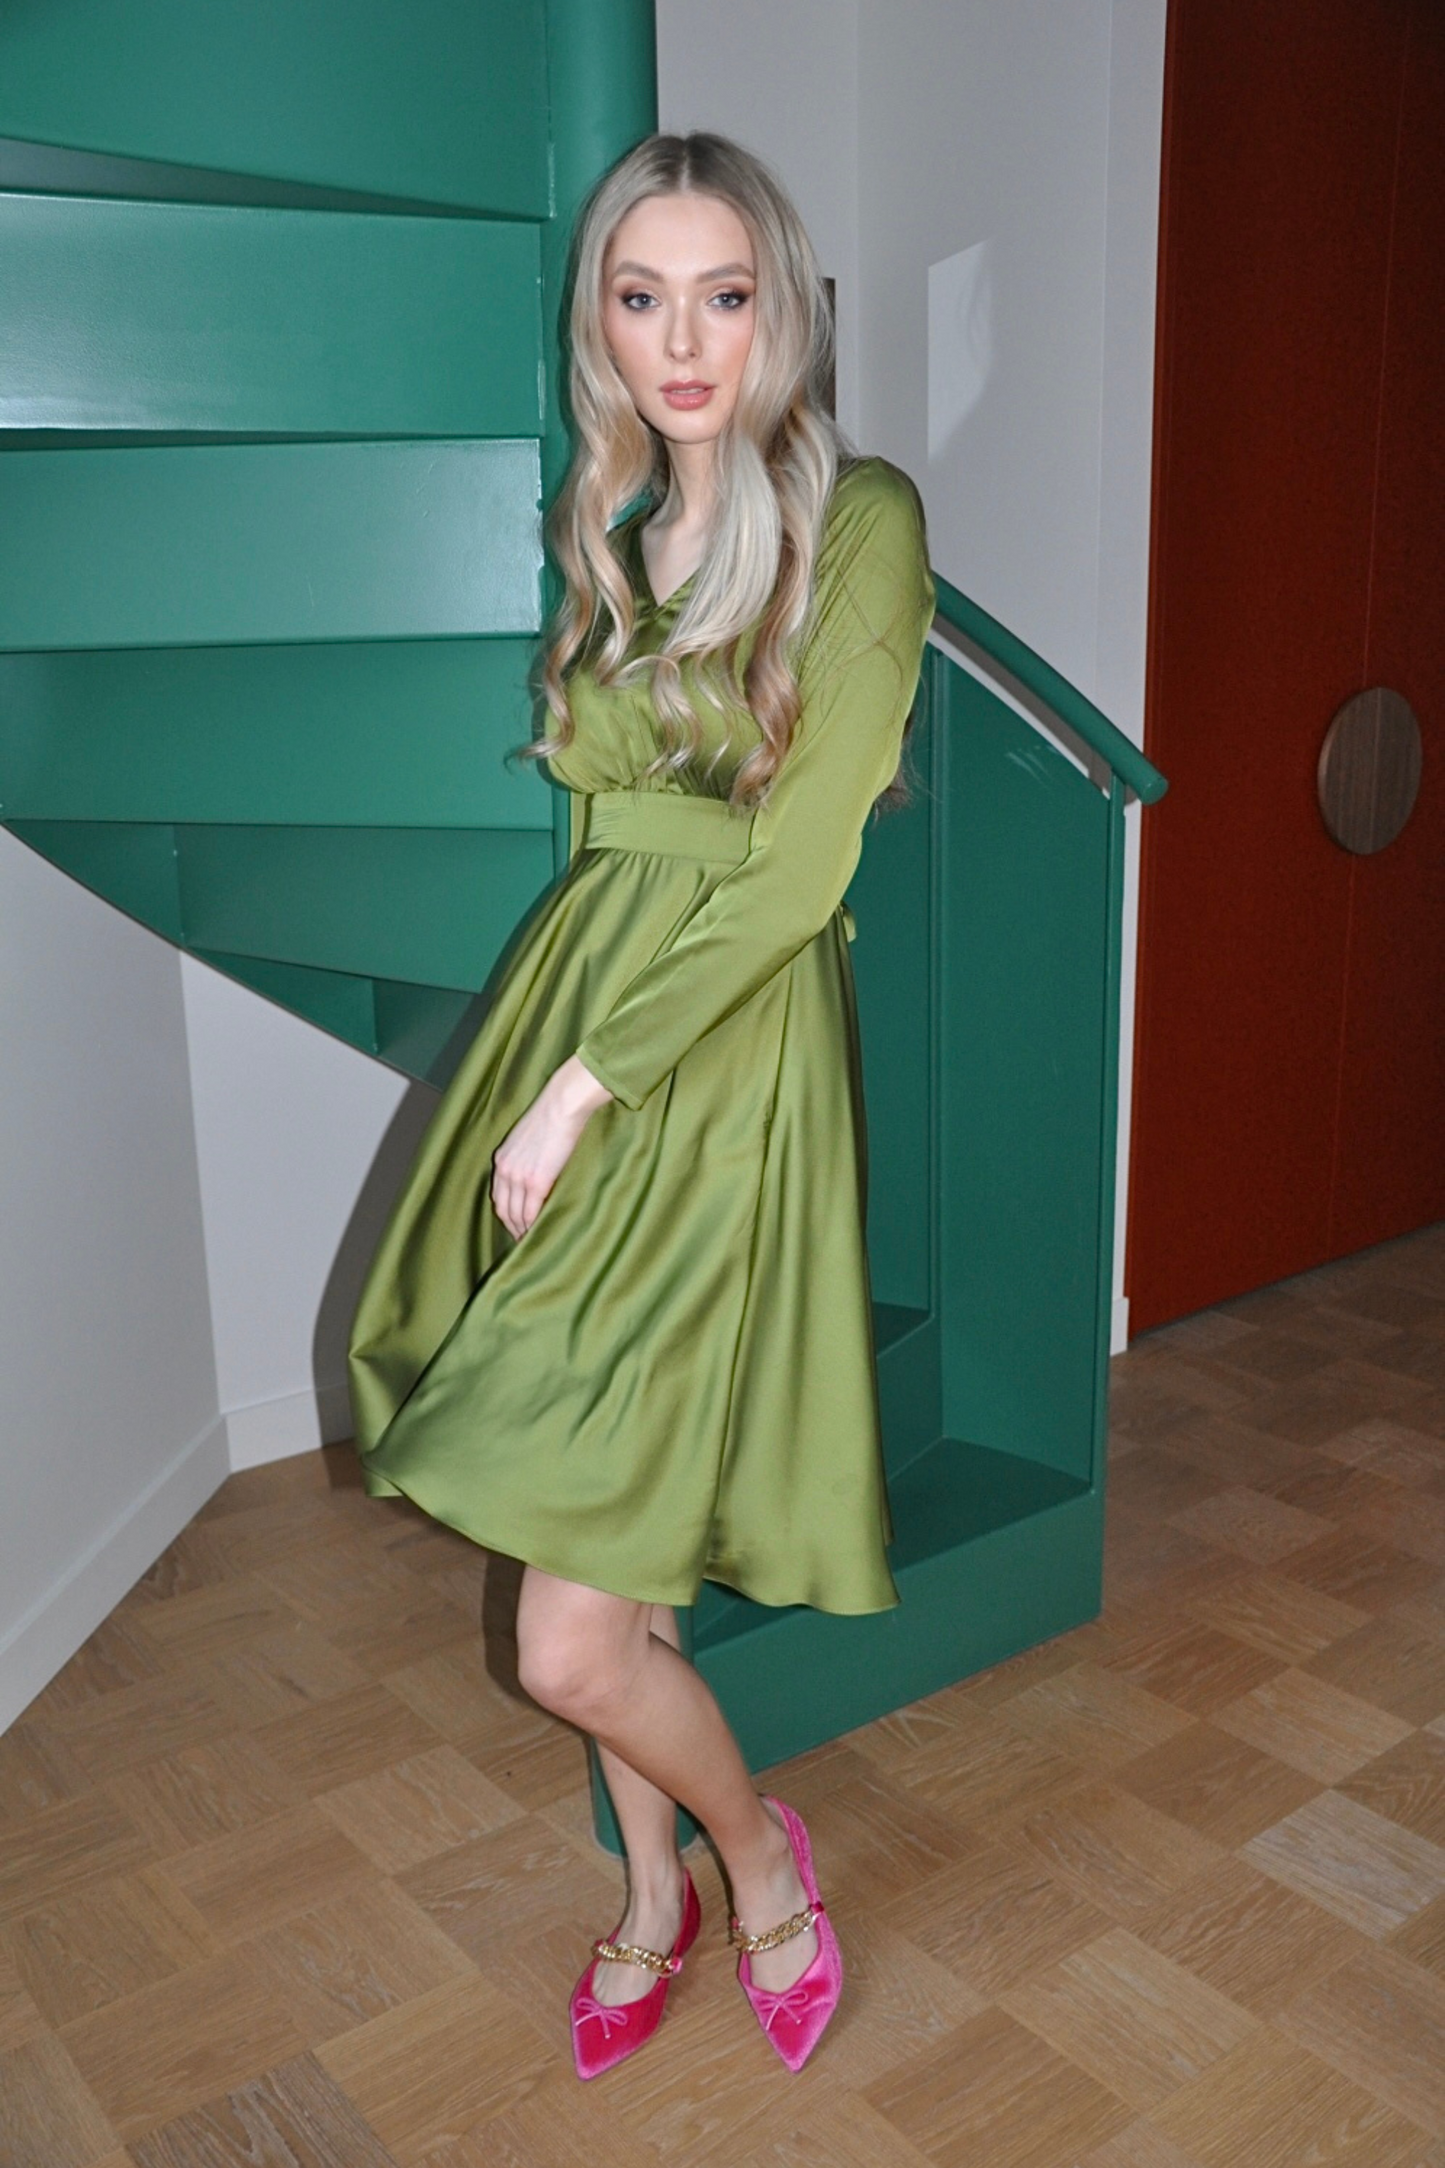 Pesto colour cocktail dress with sleeves